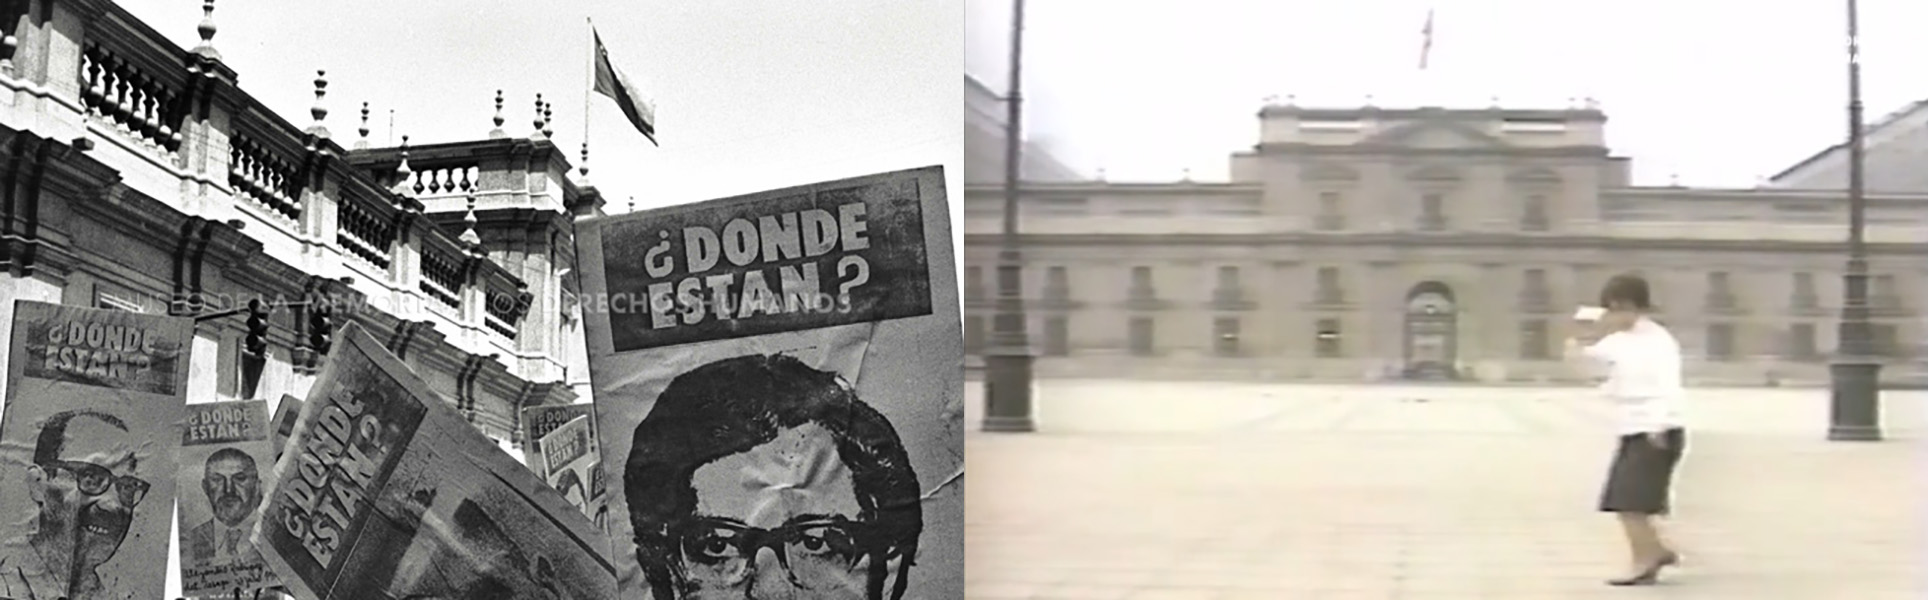 ¿Dónde están?  and La cueca sola, both initiatives of the Agrupación de Familiares de Detenidos Desaparecidos (AFDD) (Association of Relatives of the Detained and Disappeared). Images by Marco Ugarte (1983) and Andrew Johnson (1992), respectively. Archive of the Museum of Memory and Human Rights, Santiago, Chile.